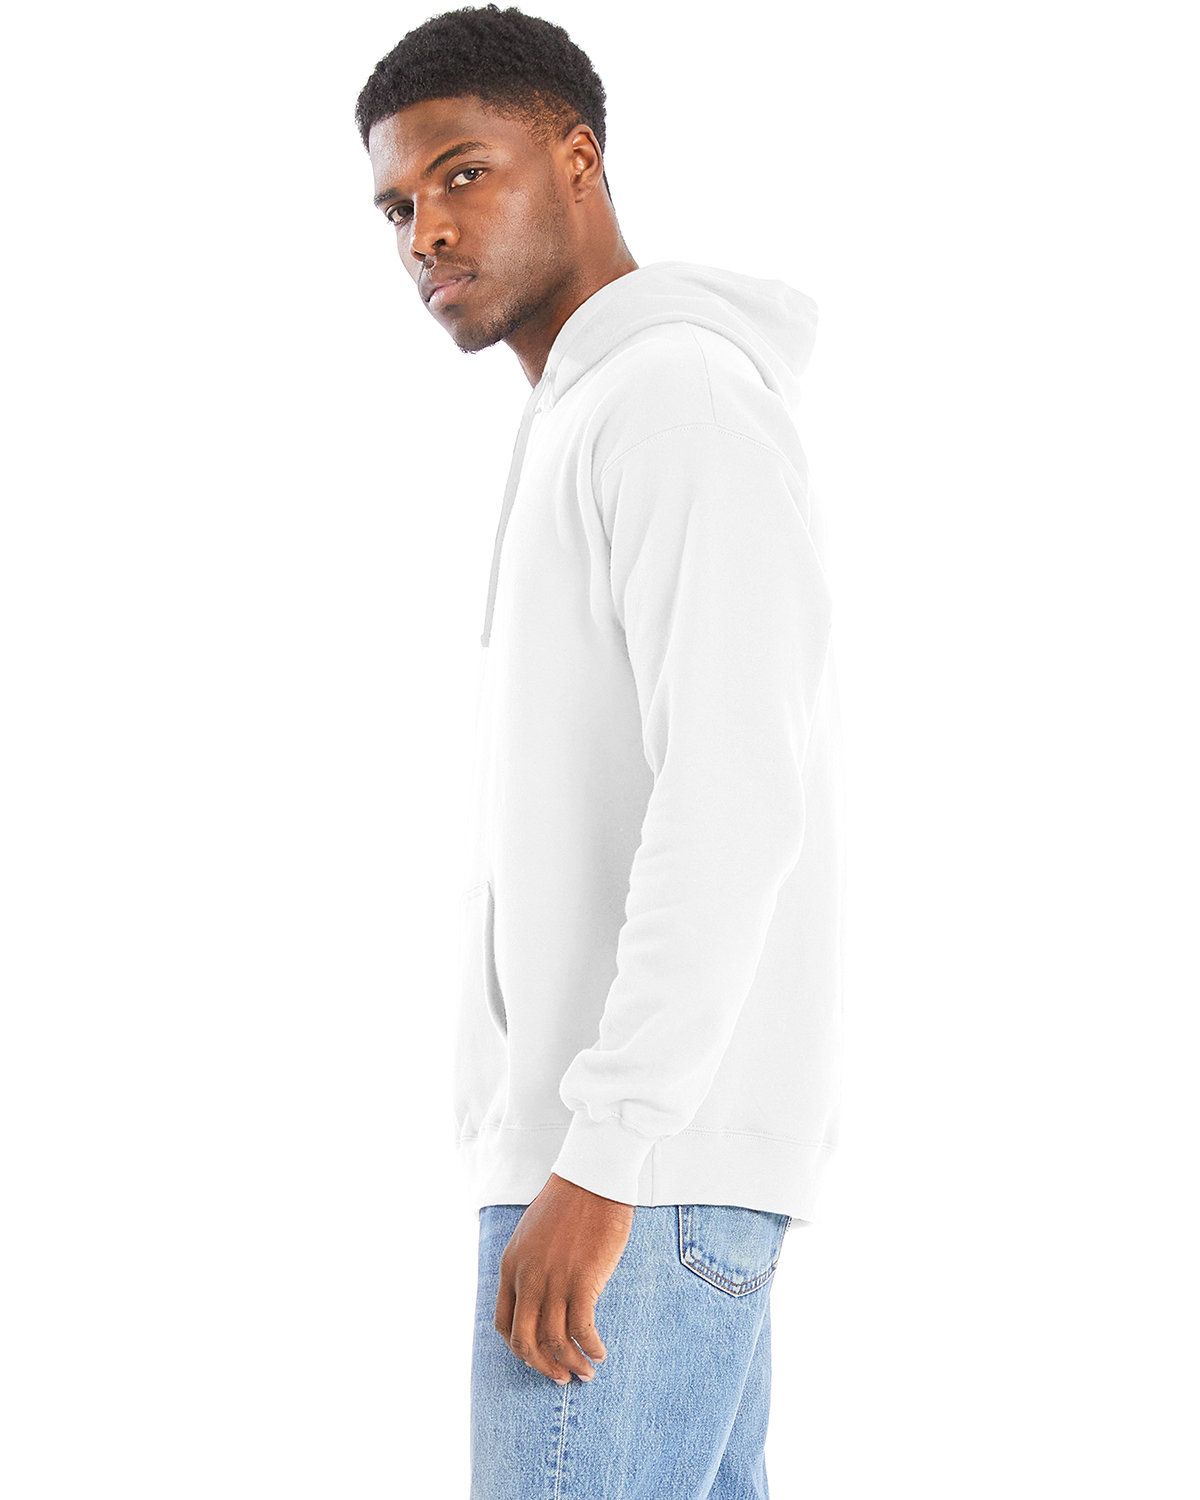 'Hanes RS170 Adult Perfect Sweats Pullover Hooded Sweatshirt'